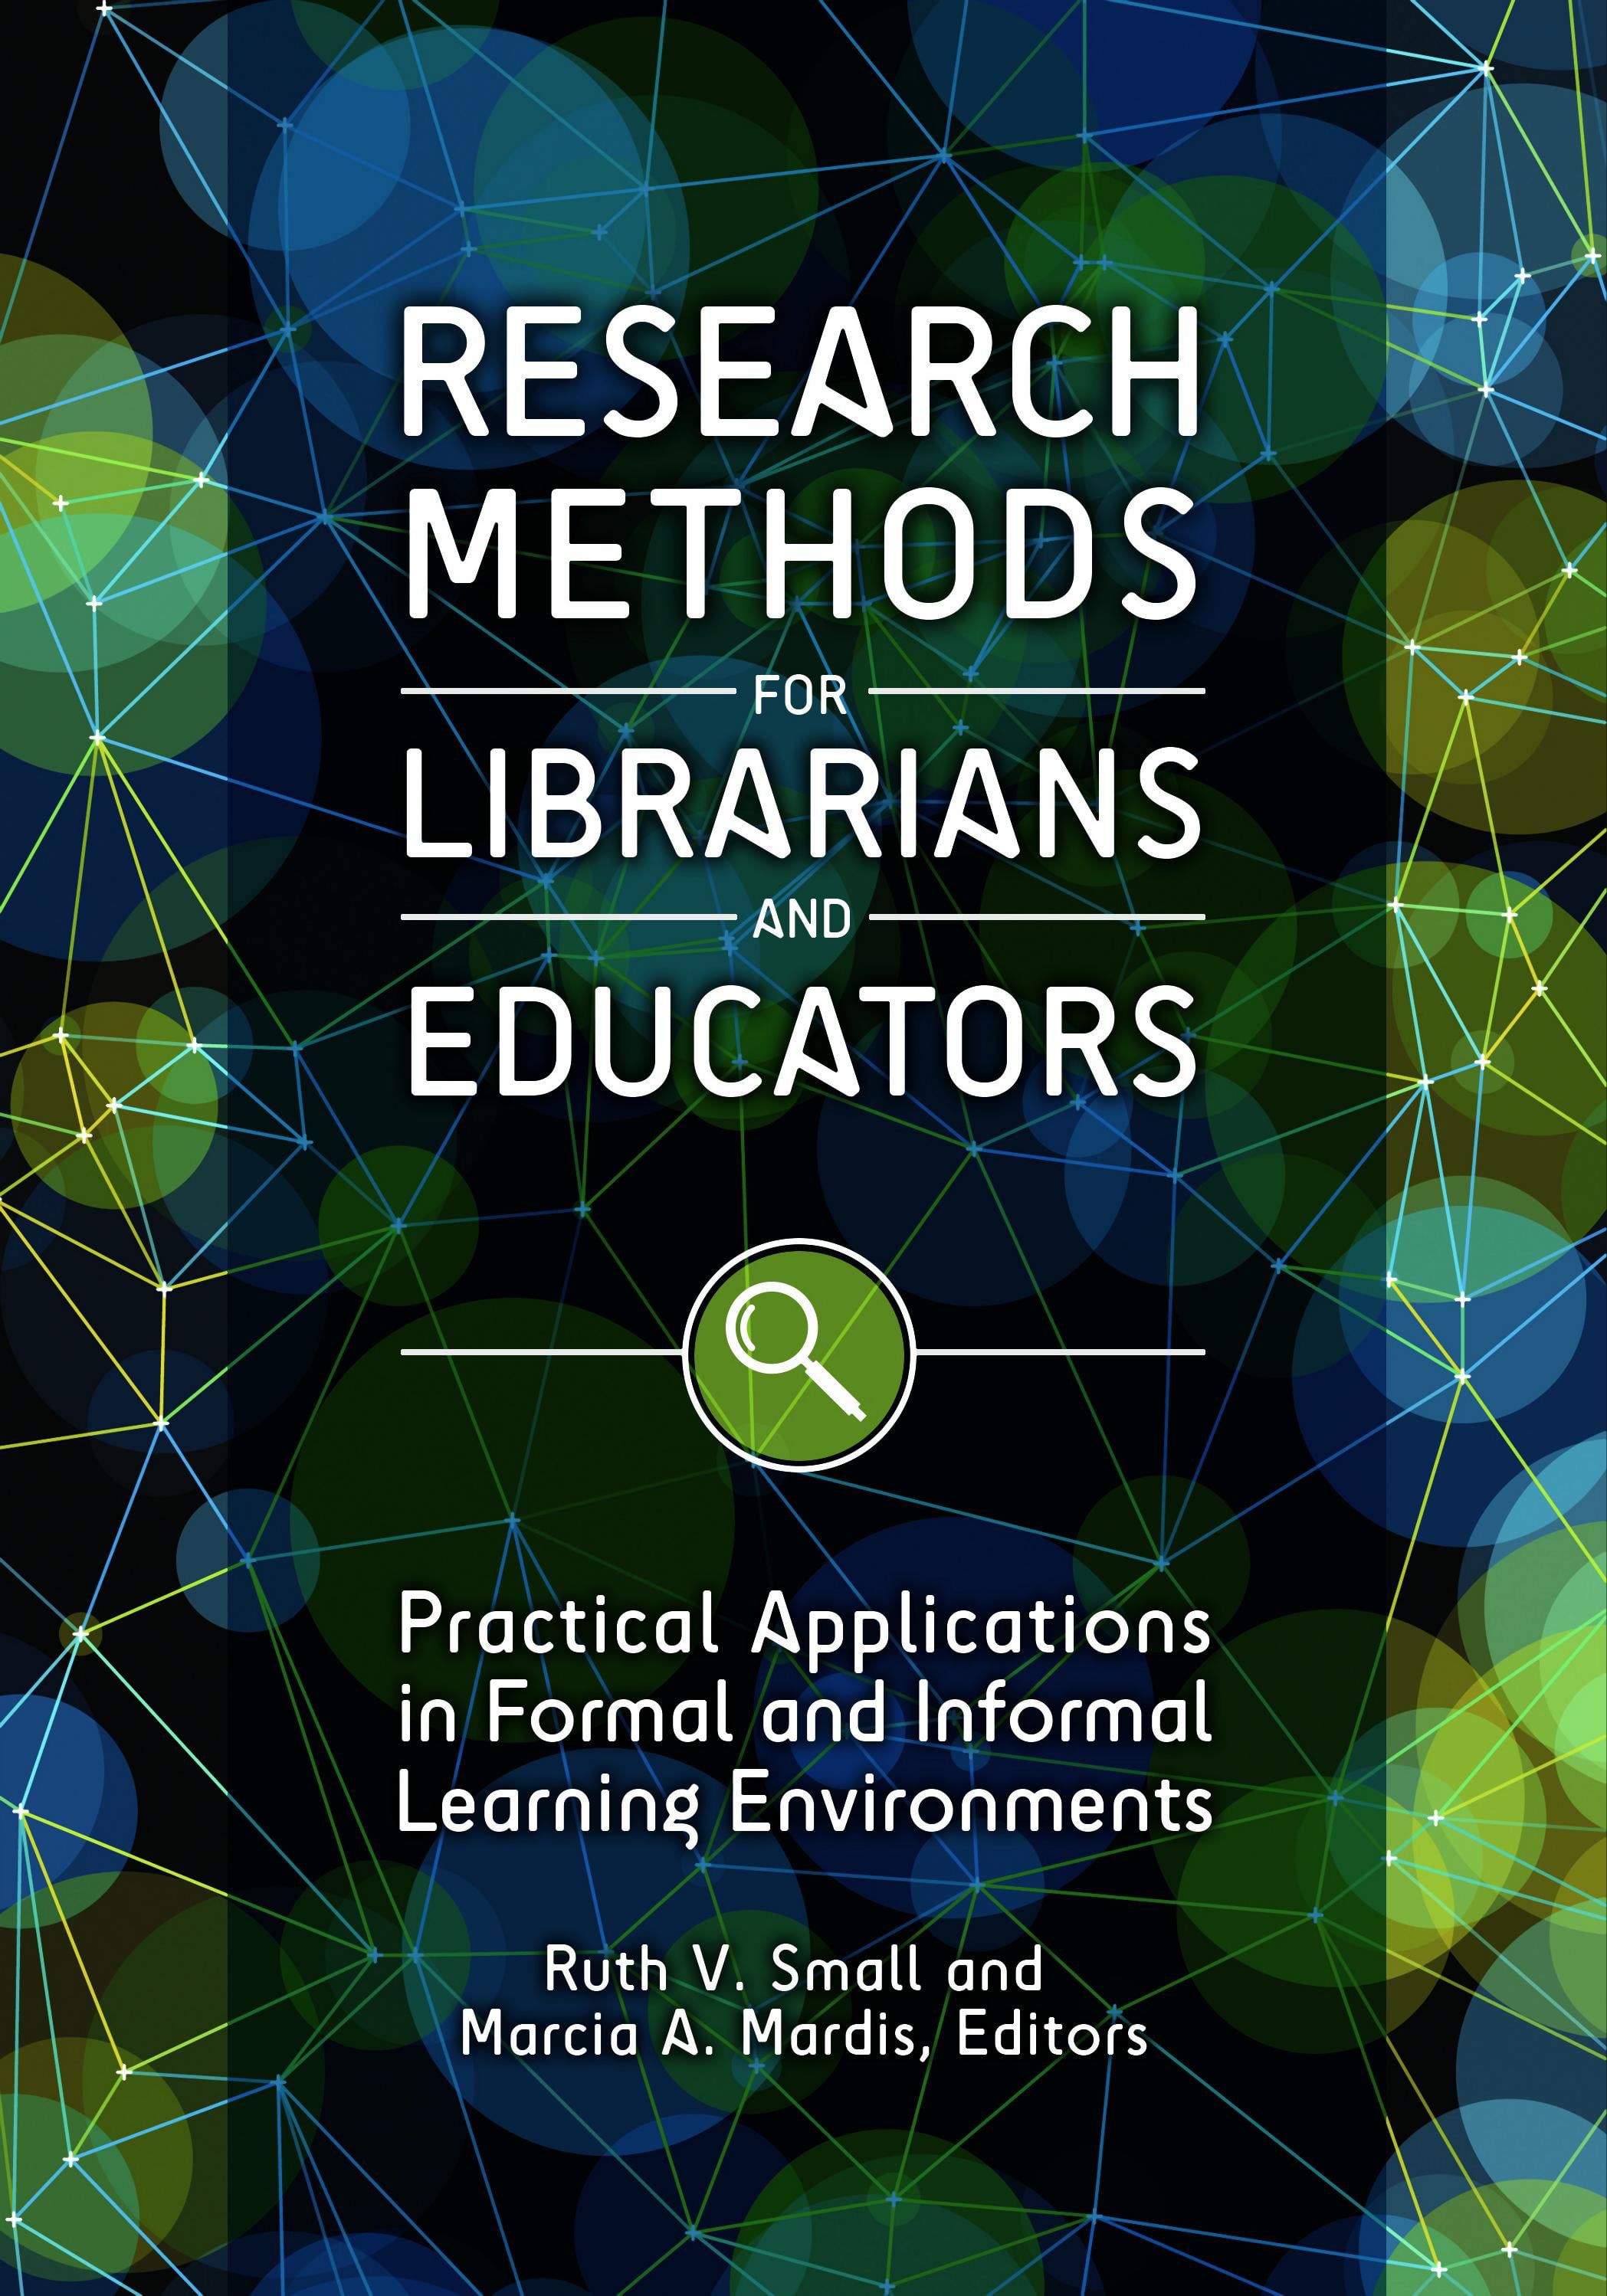 Practical Applications in Formal and Informal Learning Environments Research Methods for Librarians and Educators